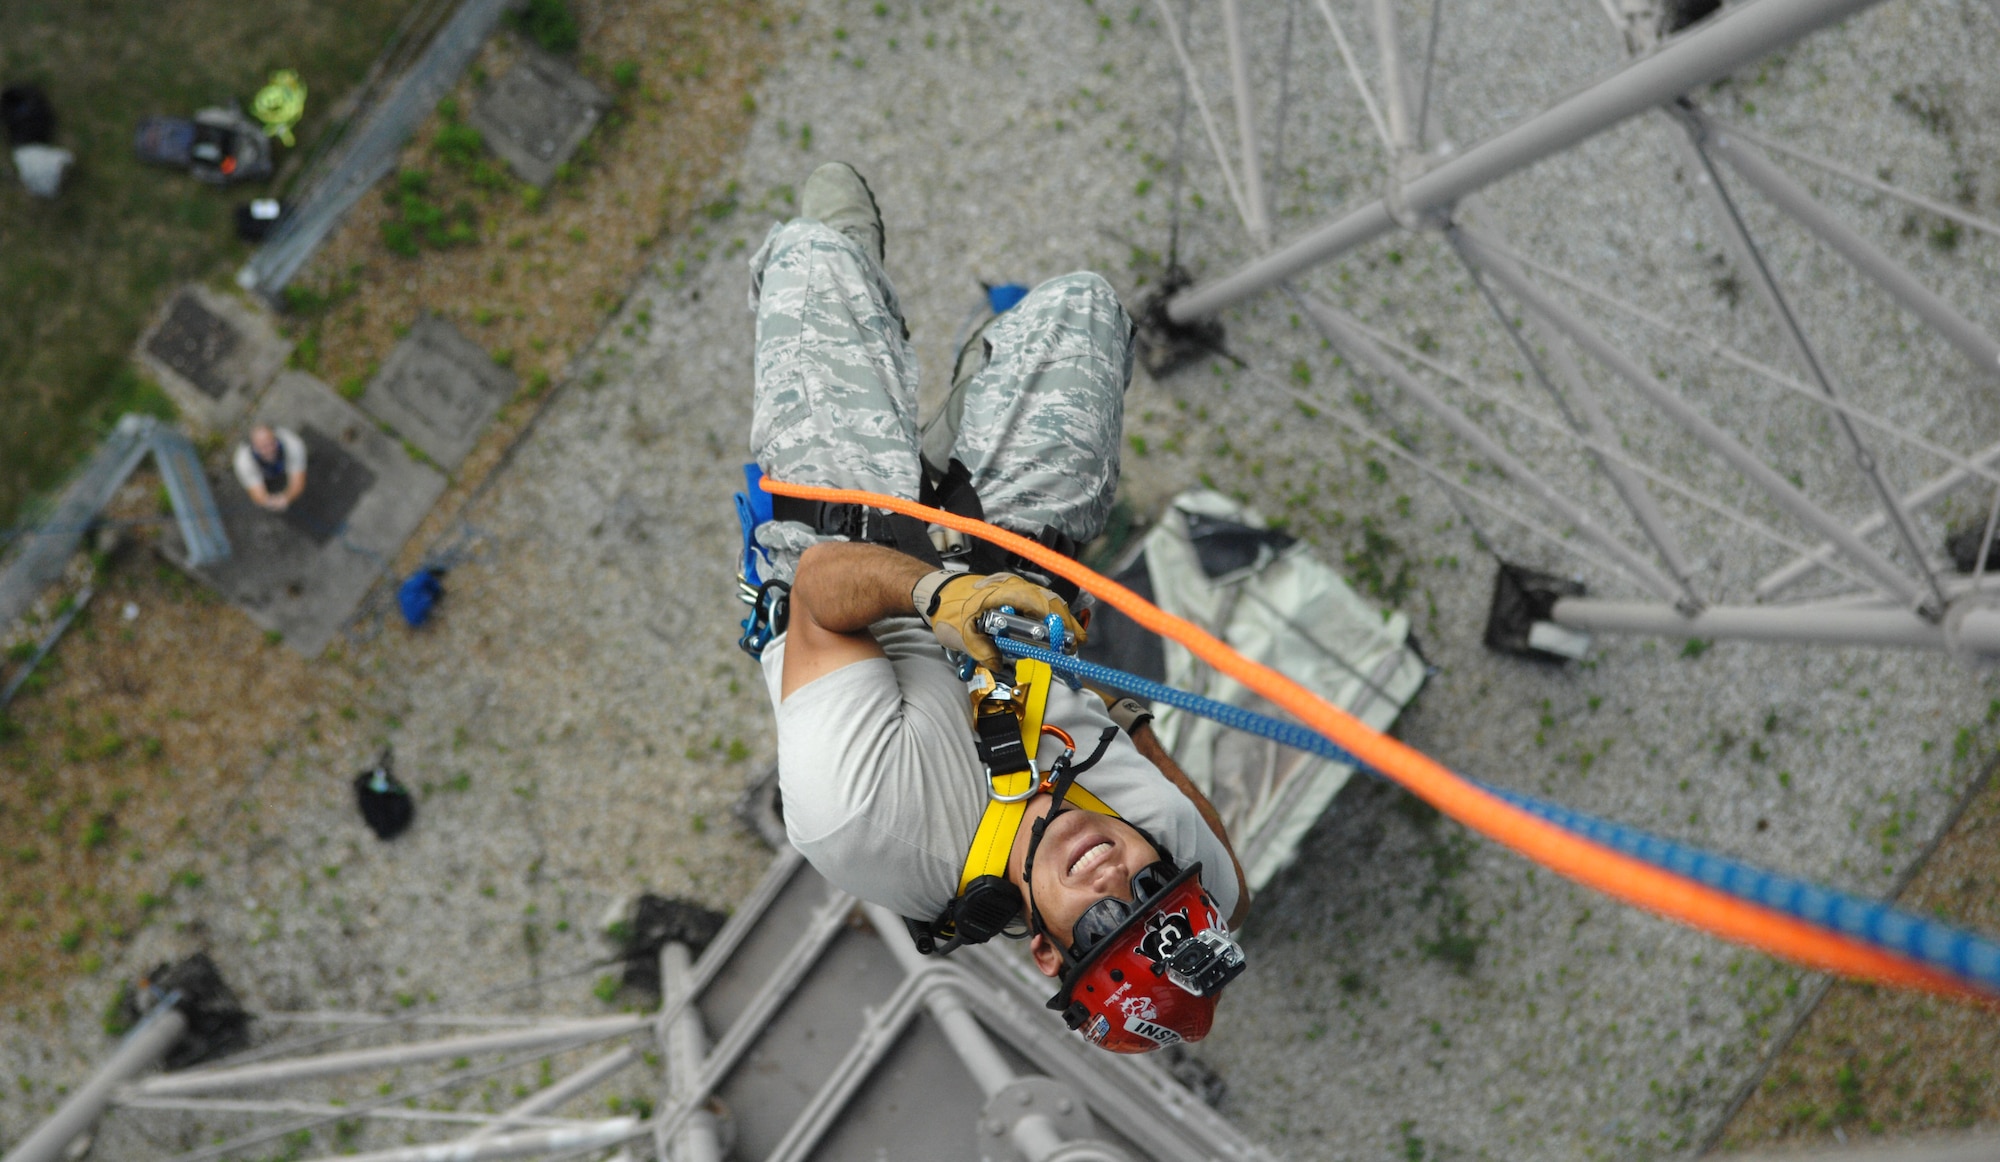 U.S. Air Force Tech. Sgt. James Hickman, 435th Construction and Training Squadron, Ramstein Air Base, Germany, fire and rescue contingency instructor, rappels from a water tower Sept. 4, 2013, on RAF Mildenhall, England. Hickman traveled to RAF Mildenhall to teach base firefighters correct rappelling procedures. The rappelling was part of the high-angle portion of the firefighters’ technical rope rescue course. (U.S. Air Force photo by Airman 1st Class Dillon Johnston/Released)